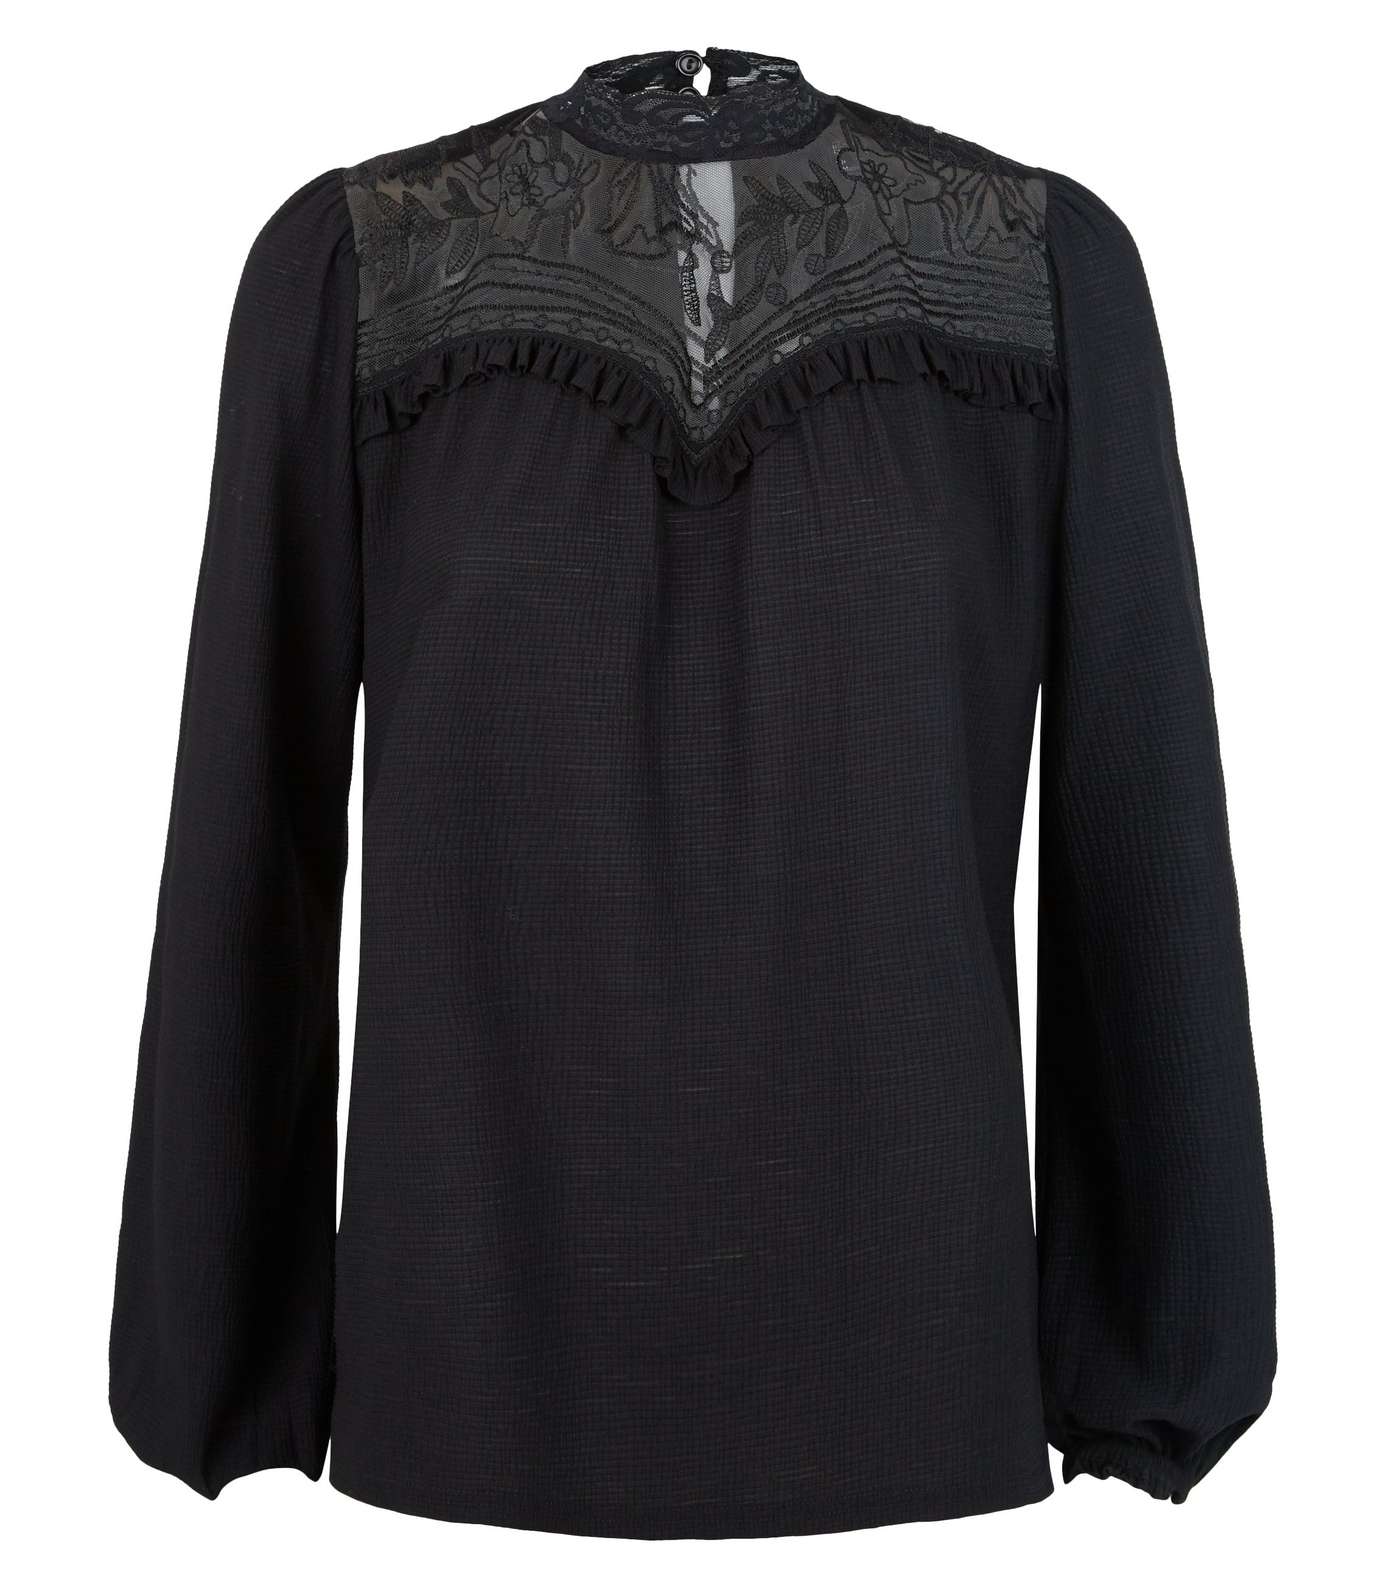 Black Textured Embroidered Yoke Top Image 4